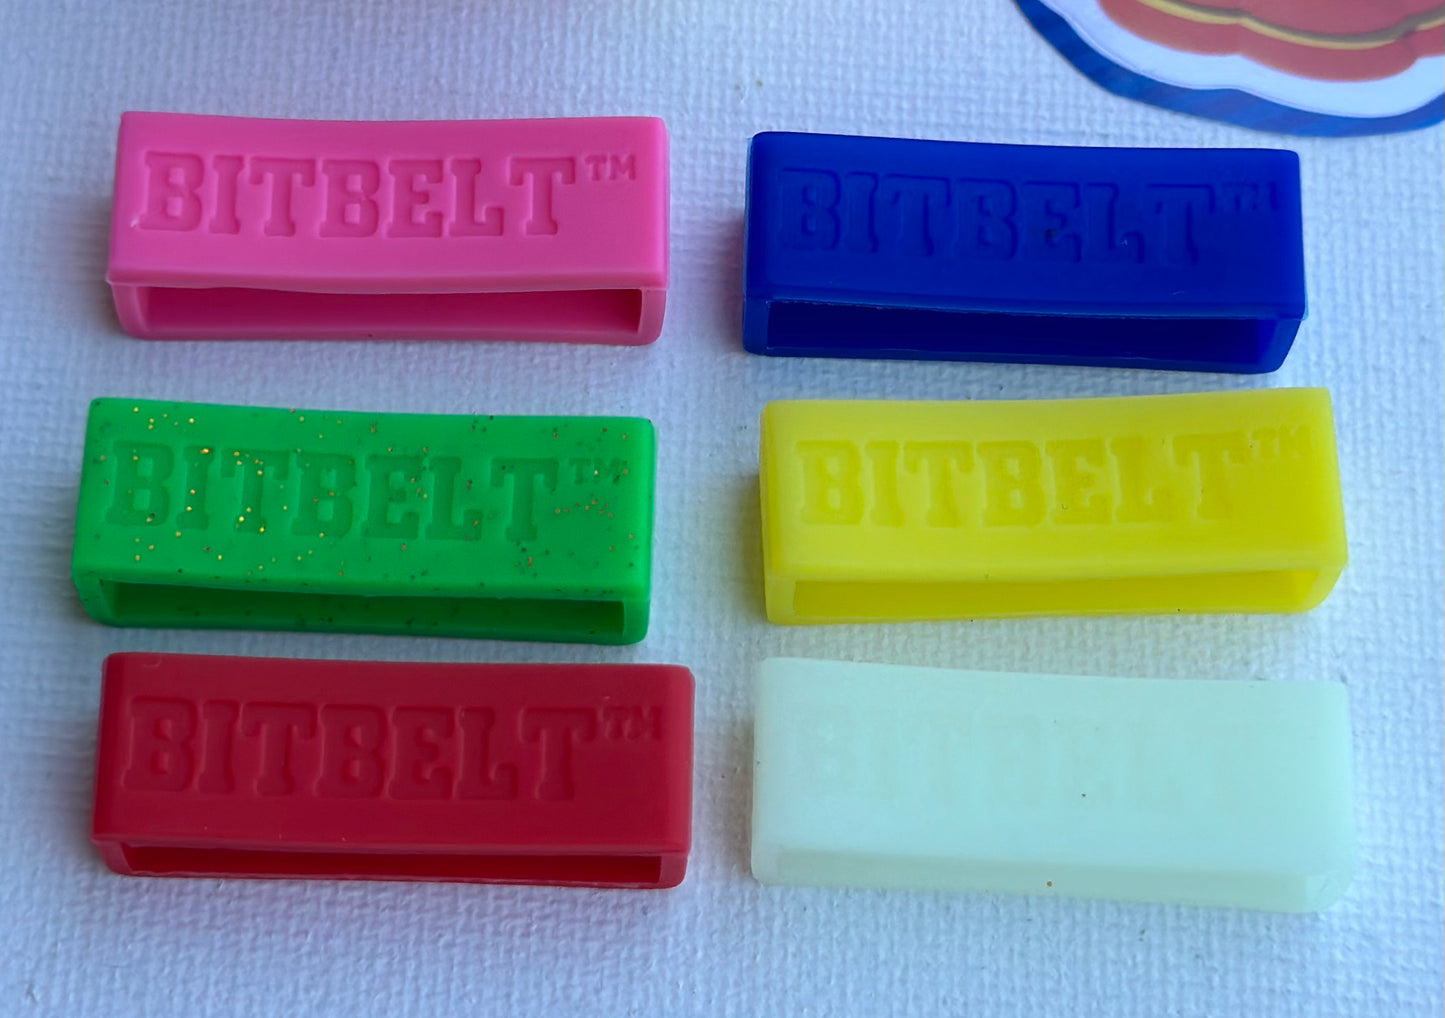 Bitbelt XL 6 pack : Red, Blue, Pink, Green with glitter, Yellow, Clear glow in the dark(Protect your Nintendo’s Power-Up Band)